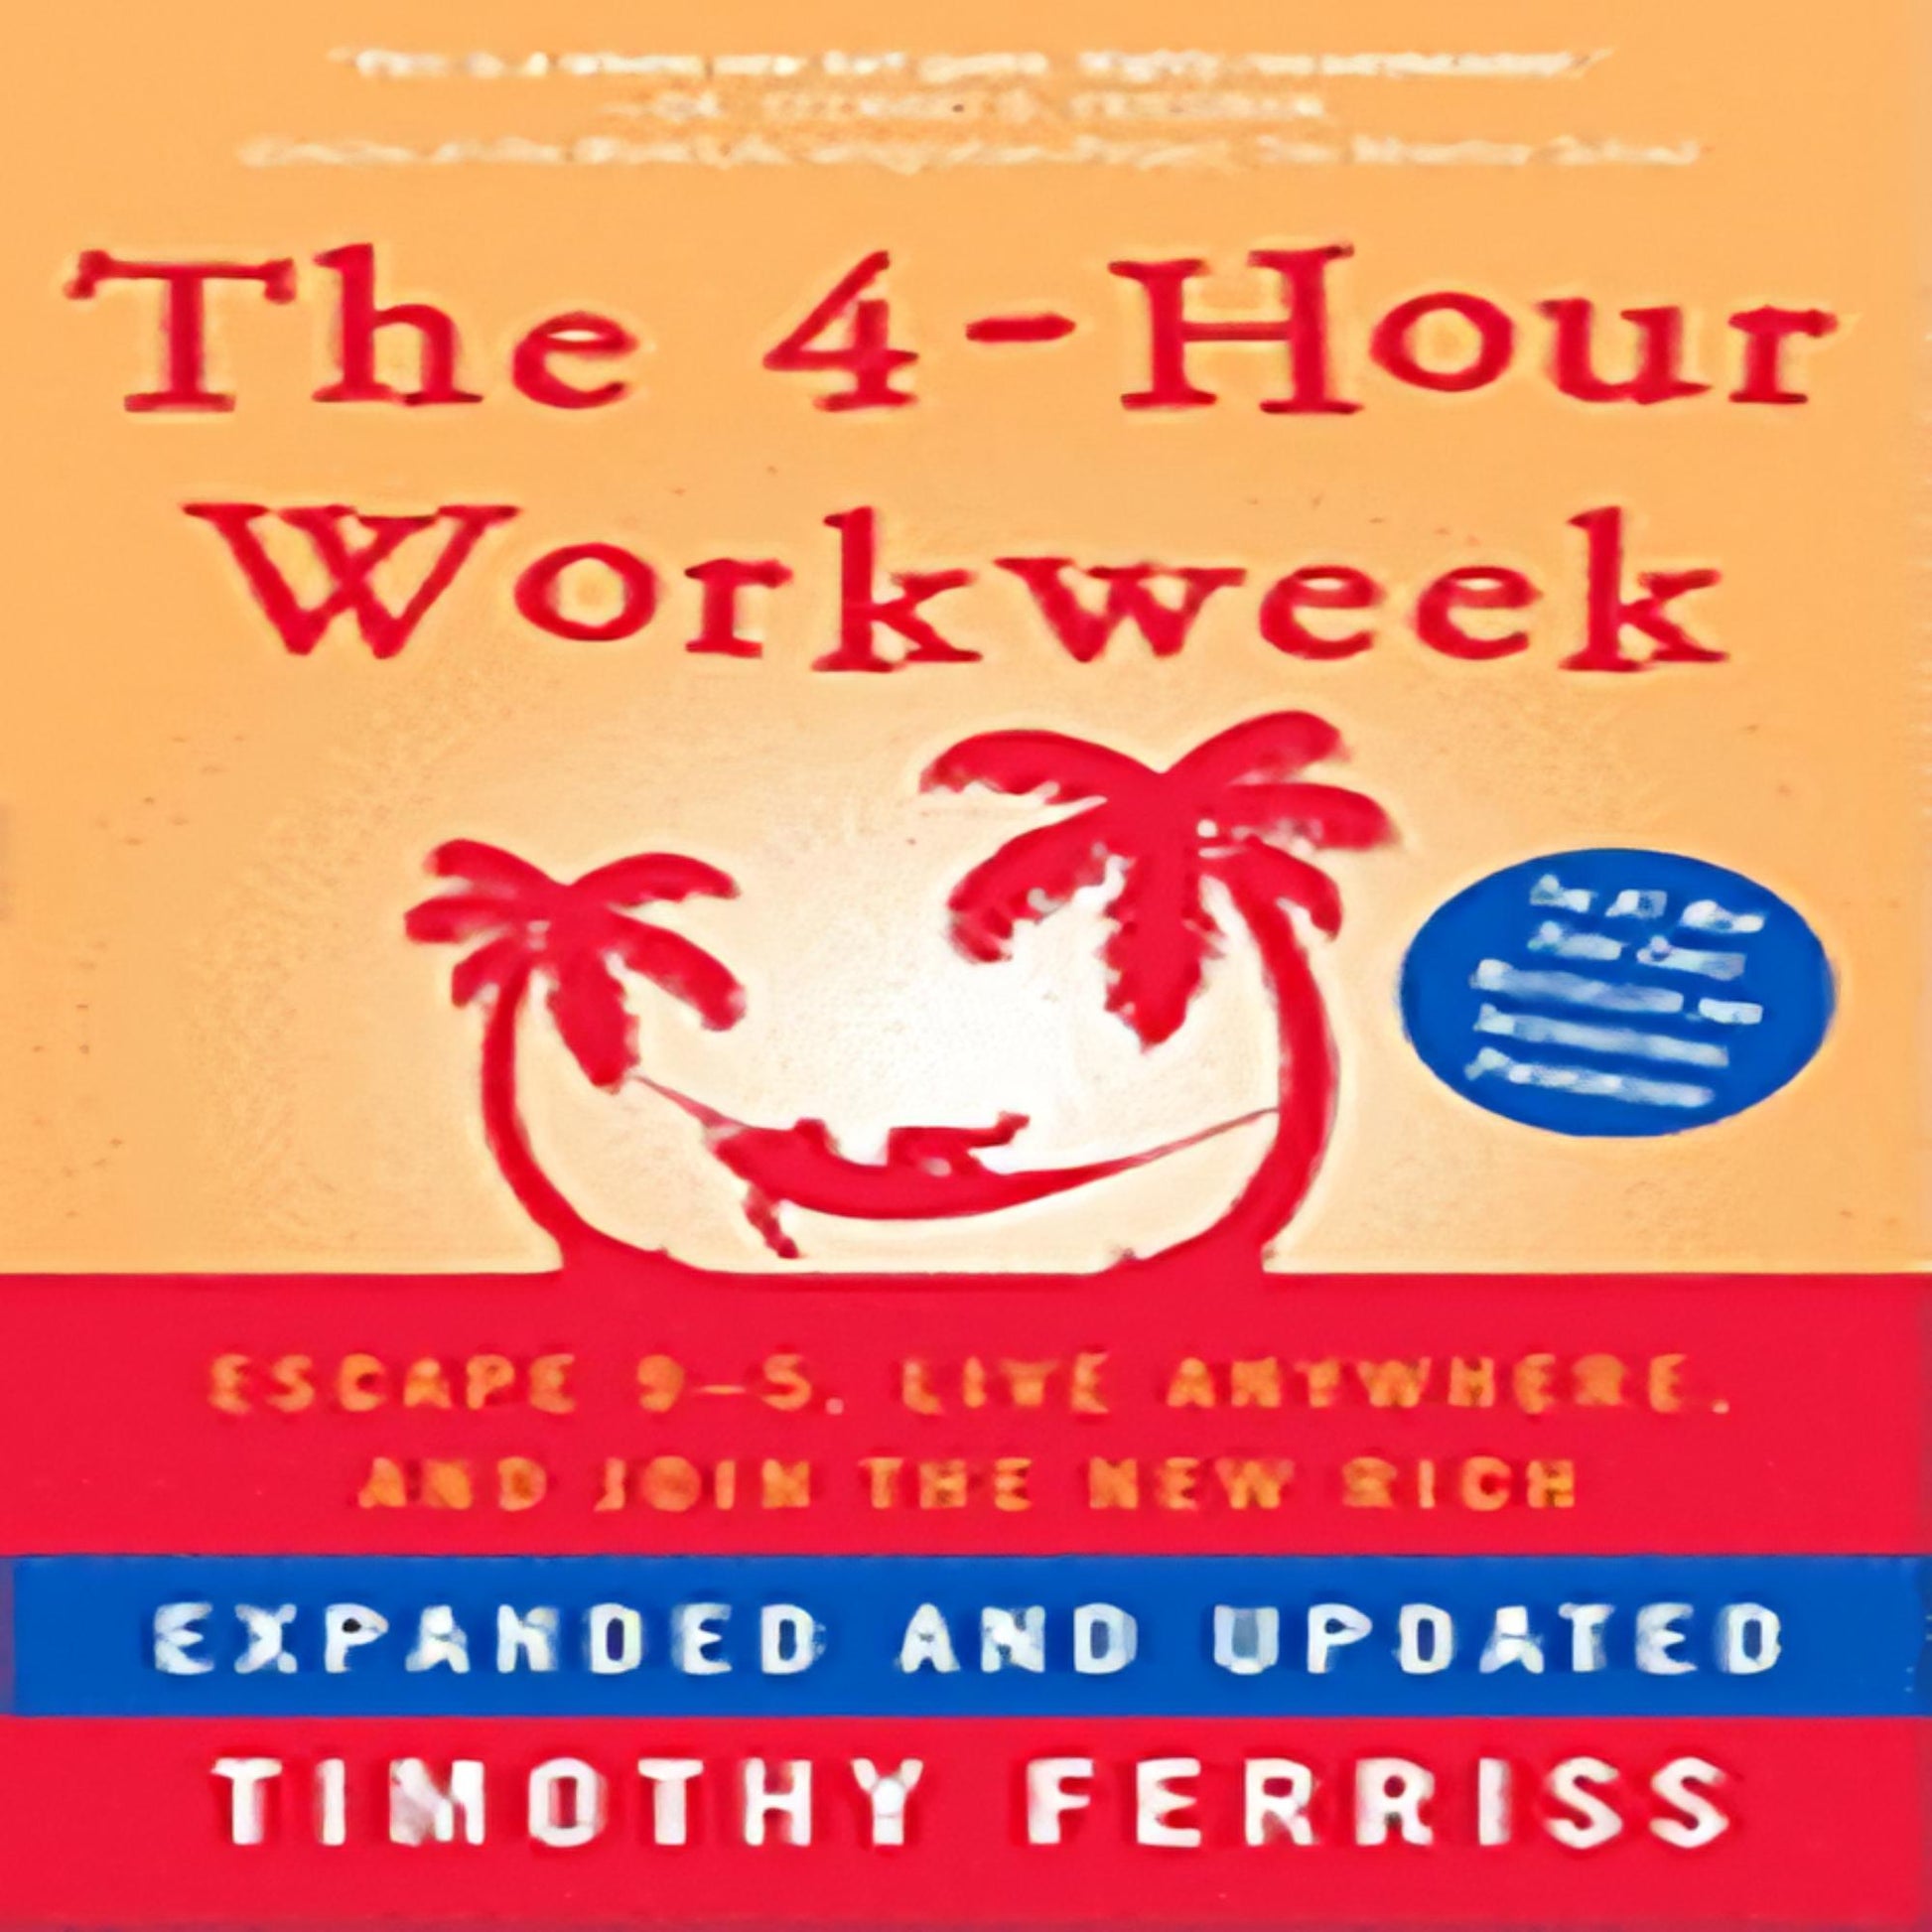 The 4-Hour Workweek: Escape 9-5, Live Anywhere, and Join the New Rich (Expanded, Updated)135-022223-0307465357DPGBOOKSTORE.COM. Today's Bestsellers.